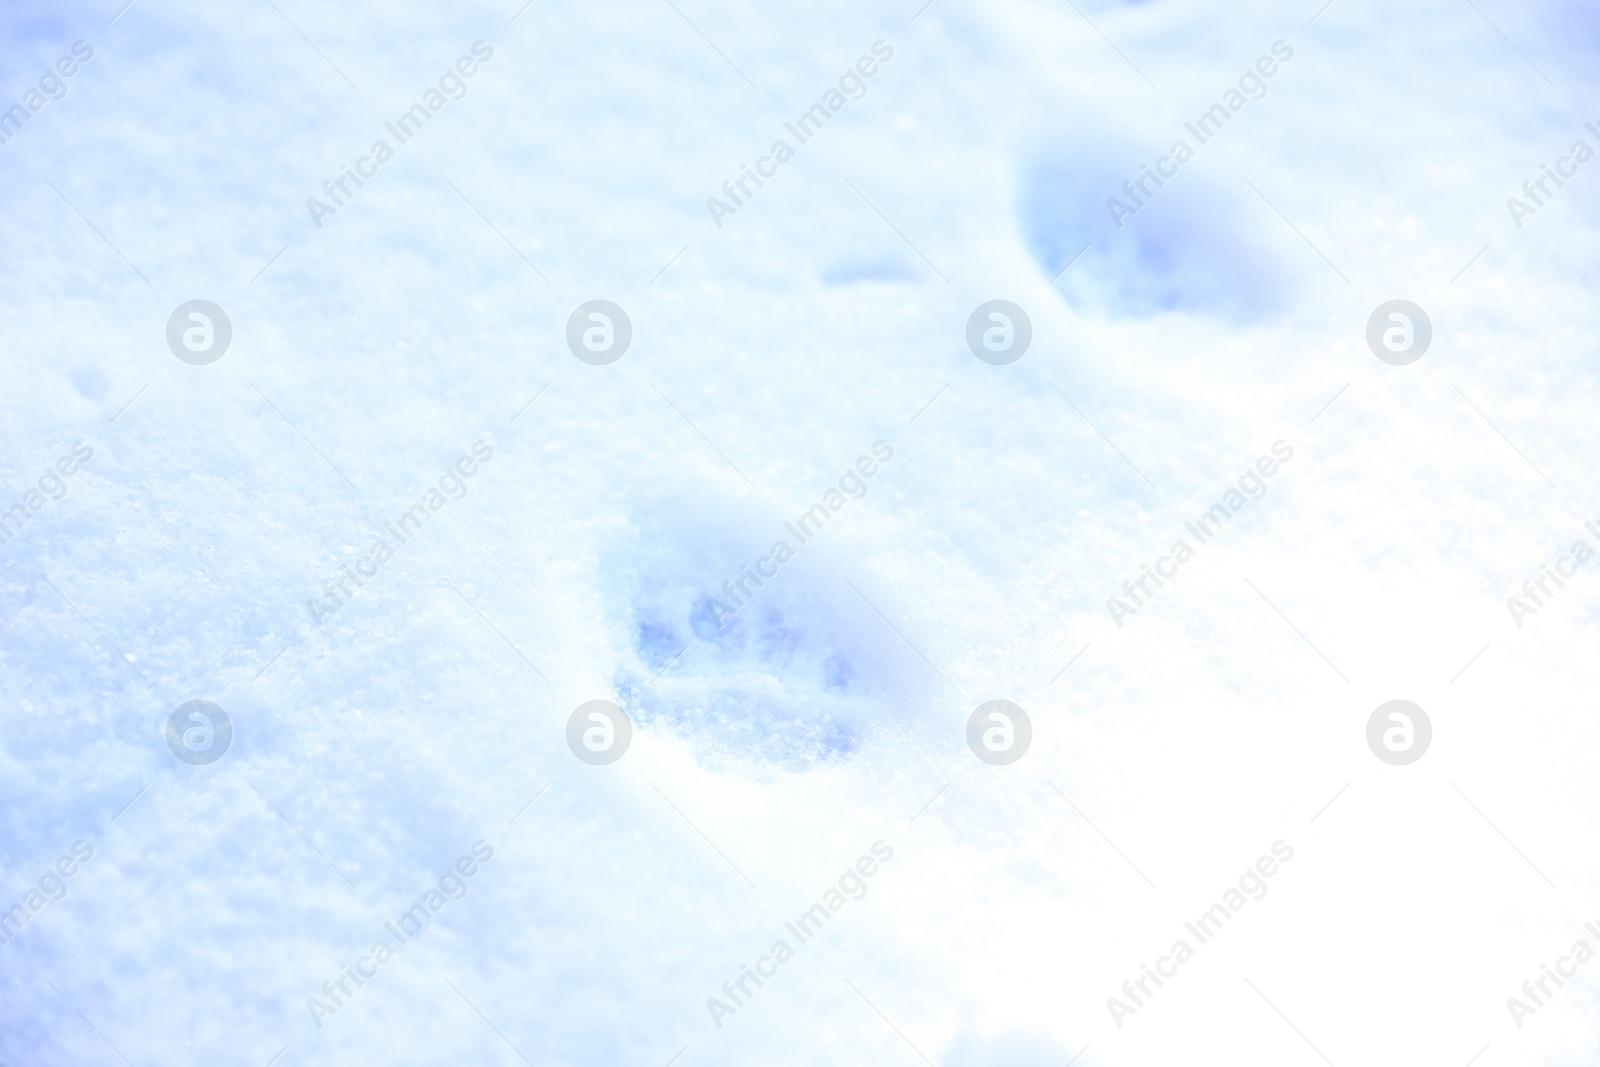 Photo of Crispy snow with animal's pawprints as background